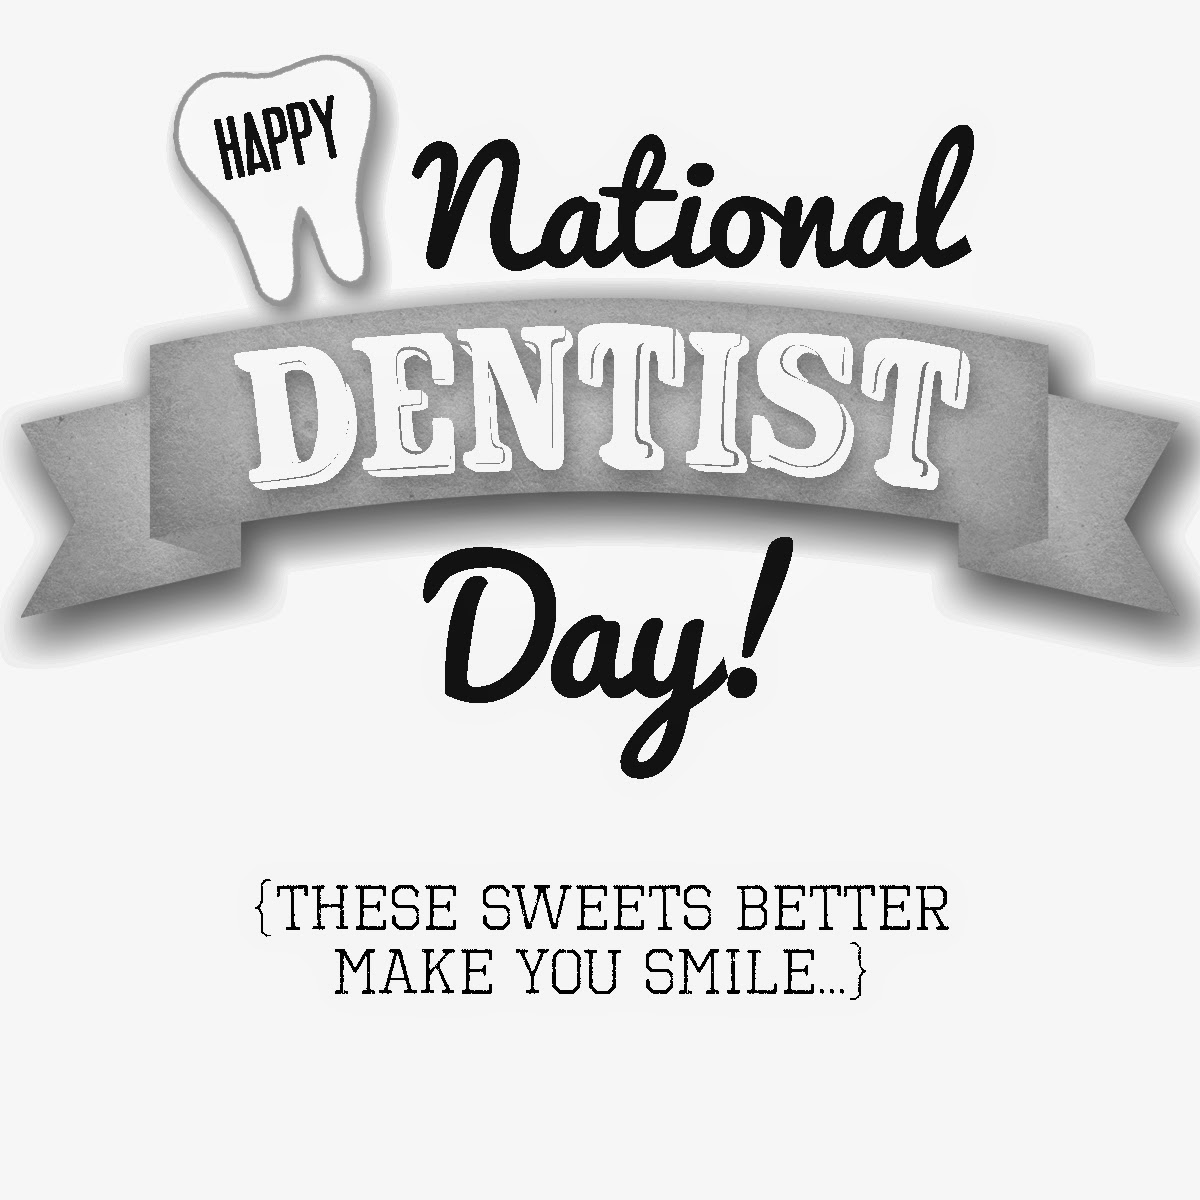 National Dentist Day Gift - especially for the daddy dentists & adaptable for any dentist! [includes free tag printable]